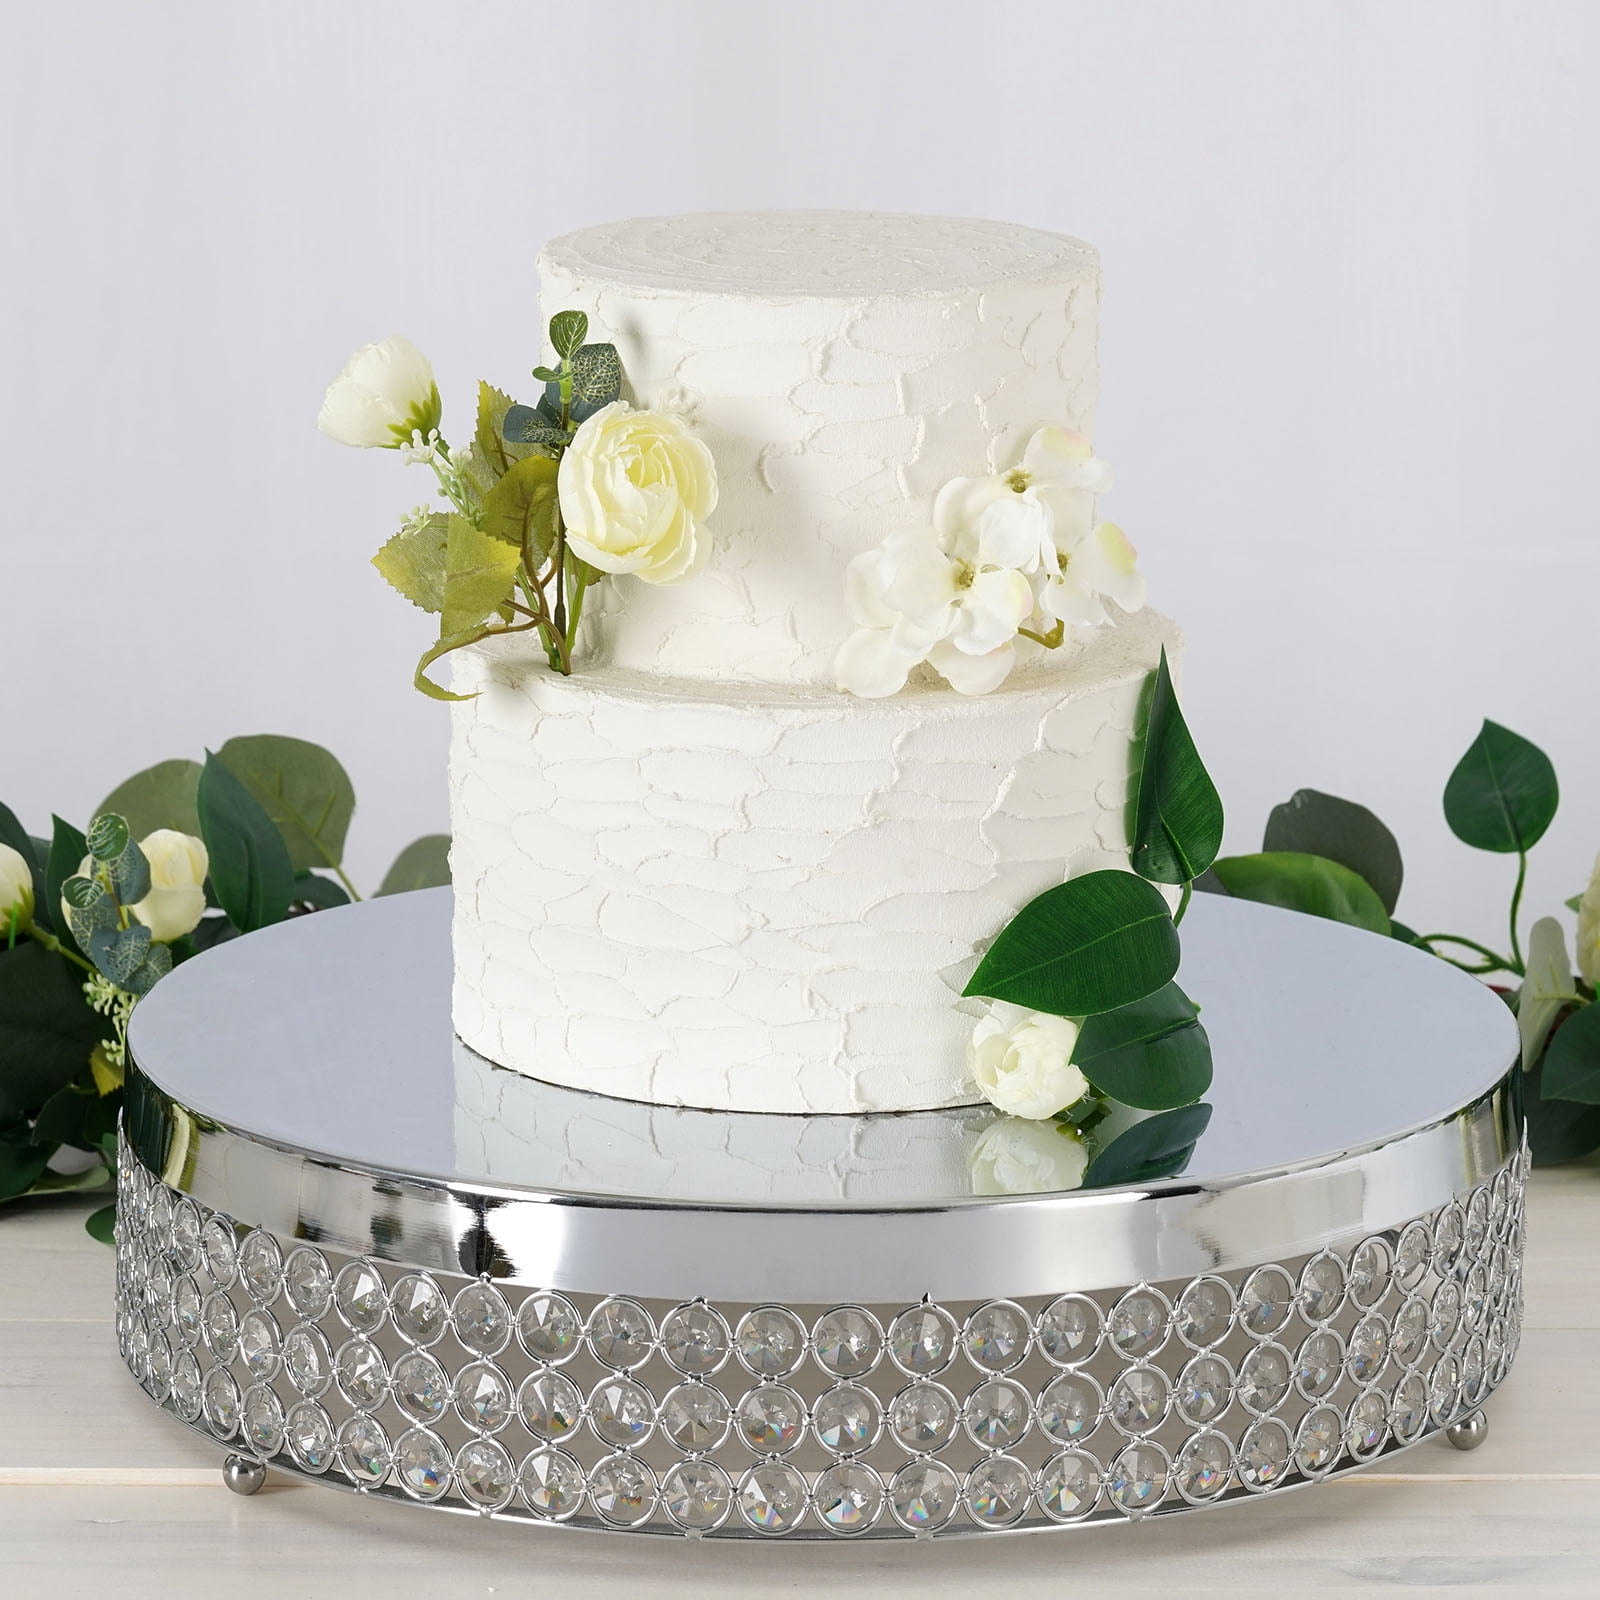 18 x 5.5 Inch Round Designer Crystal Stainless Steel Cake Stand Bejeweled 